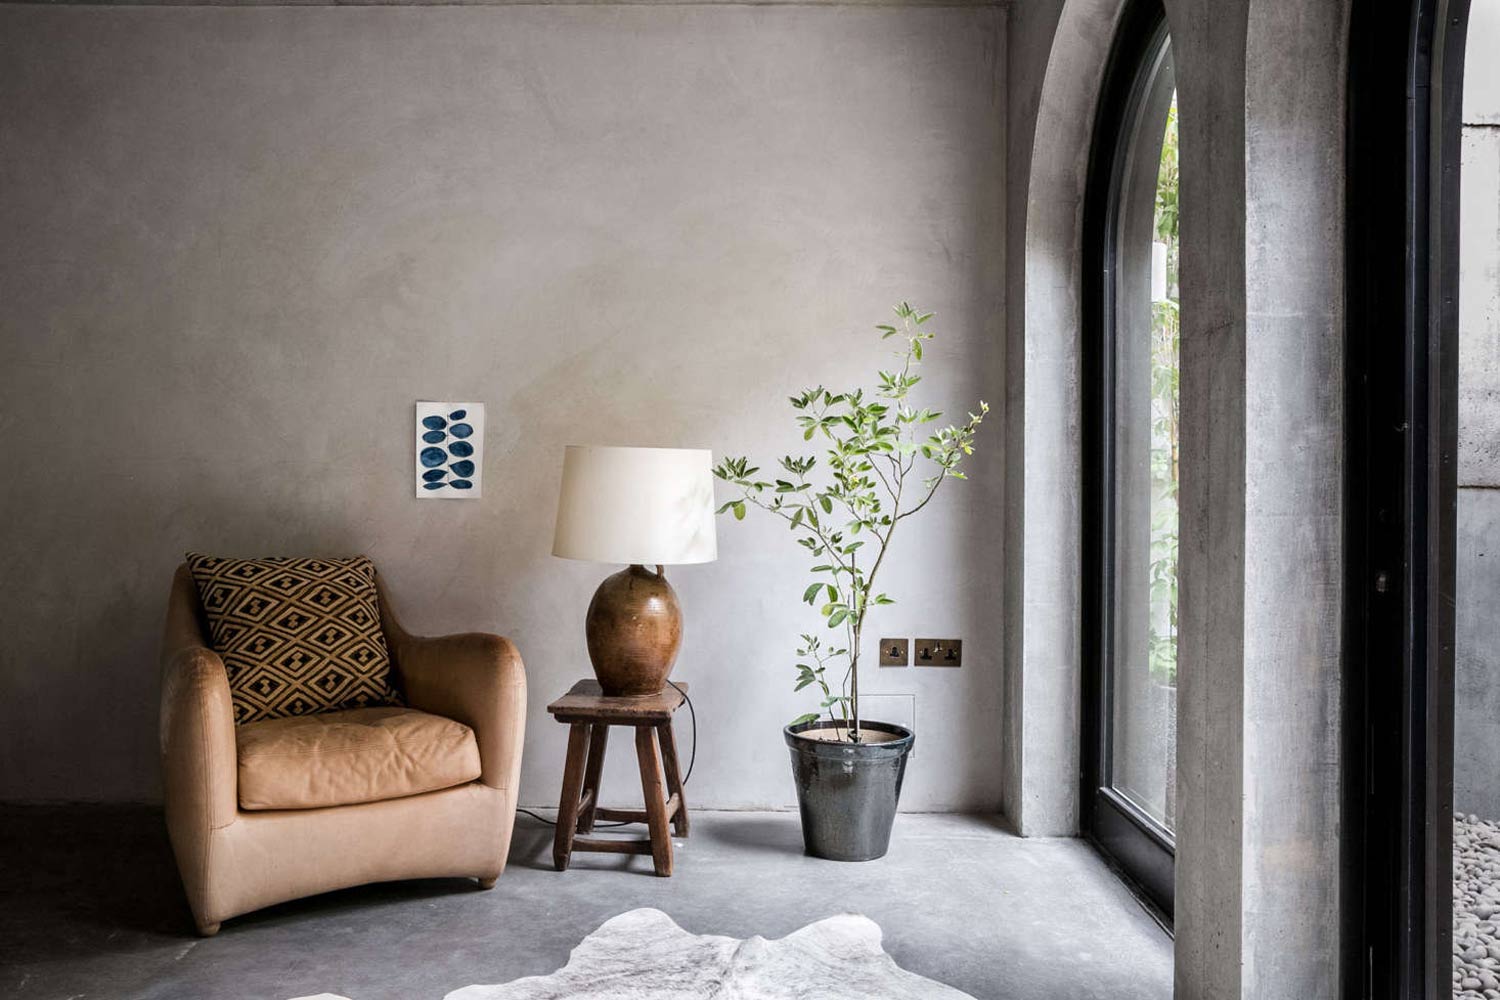 wabi sabi living room with a leather arm chair, textured walls and zen like plants indoors and out